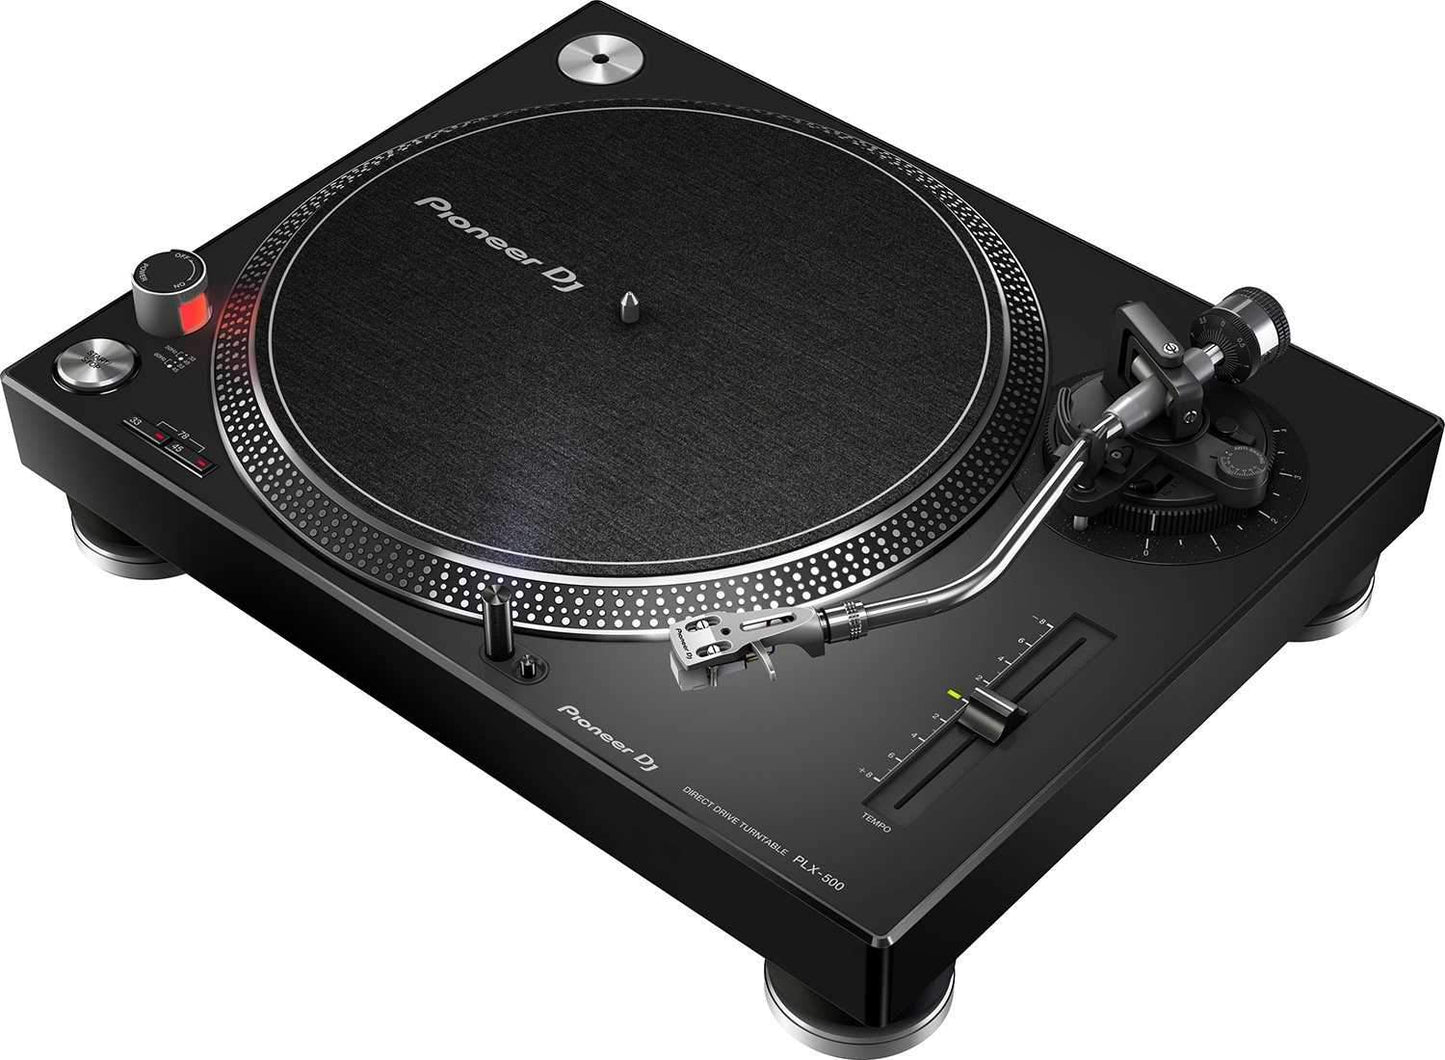 Pioneer PLX-500-K Direct Drive Turntable - PSSL ProSound and Stage Lighting